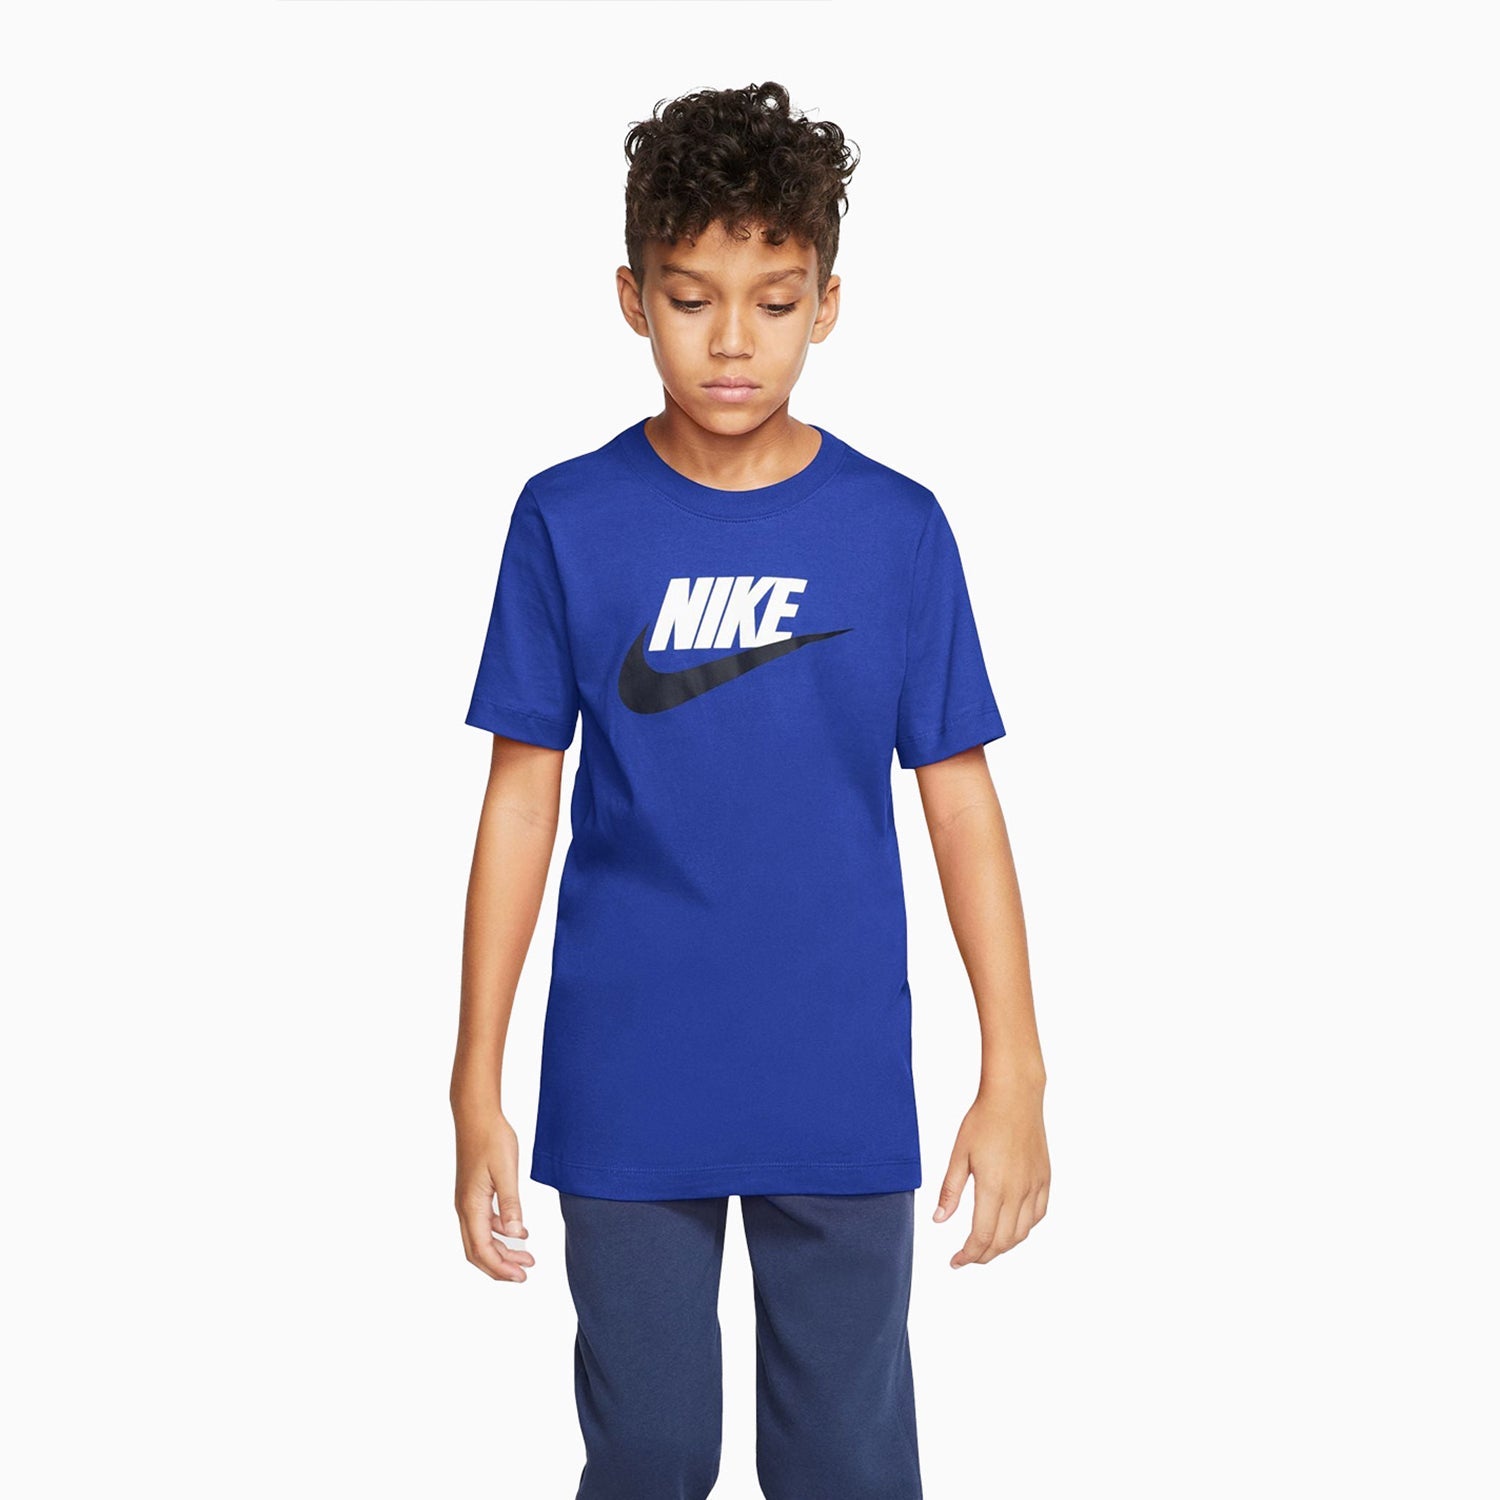 nike-kids-sportswear-t-shirt-and-short-outfit-ar5252-481-ck0509-481